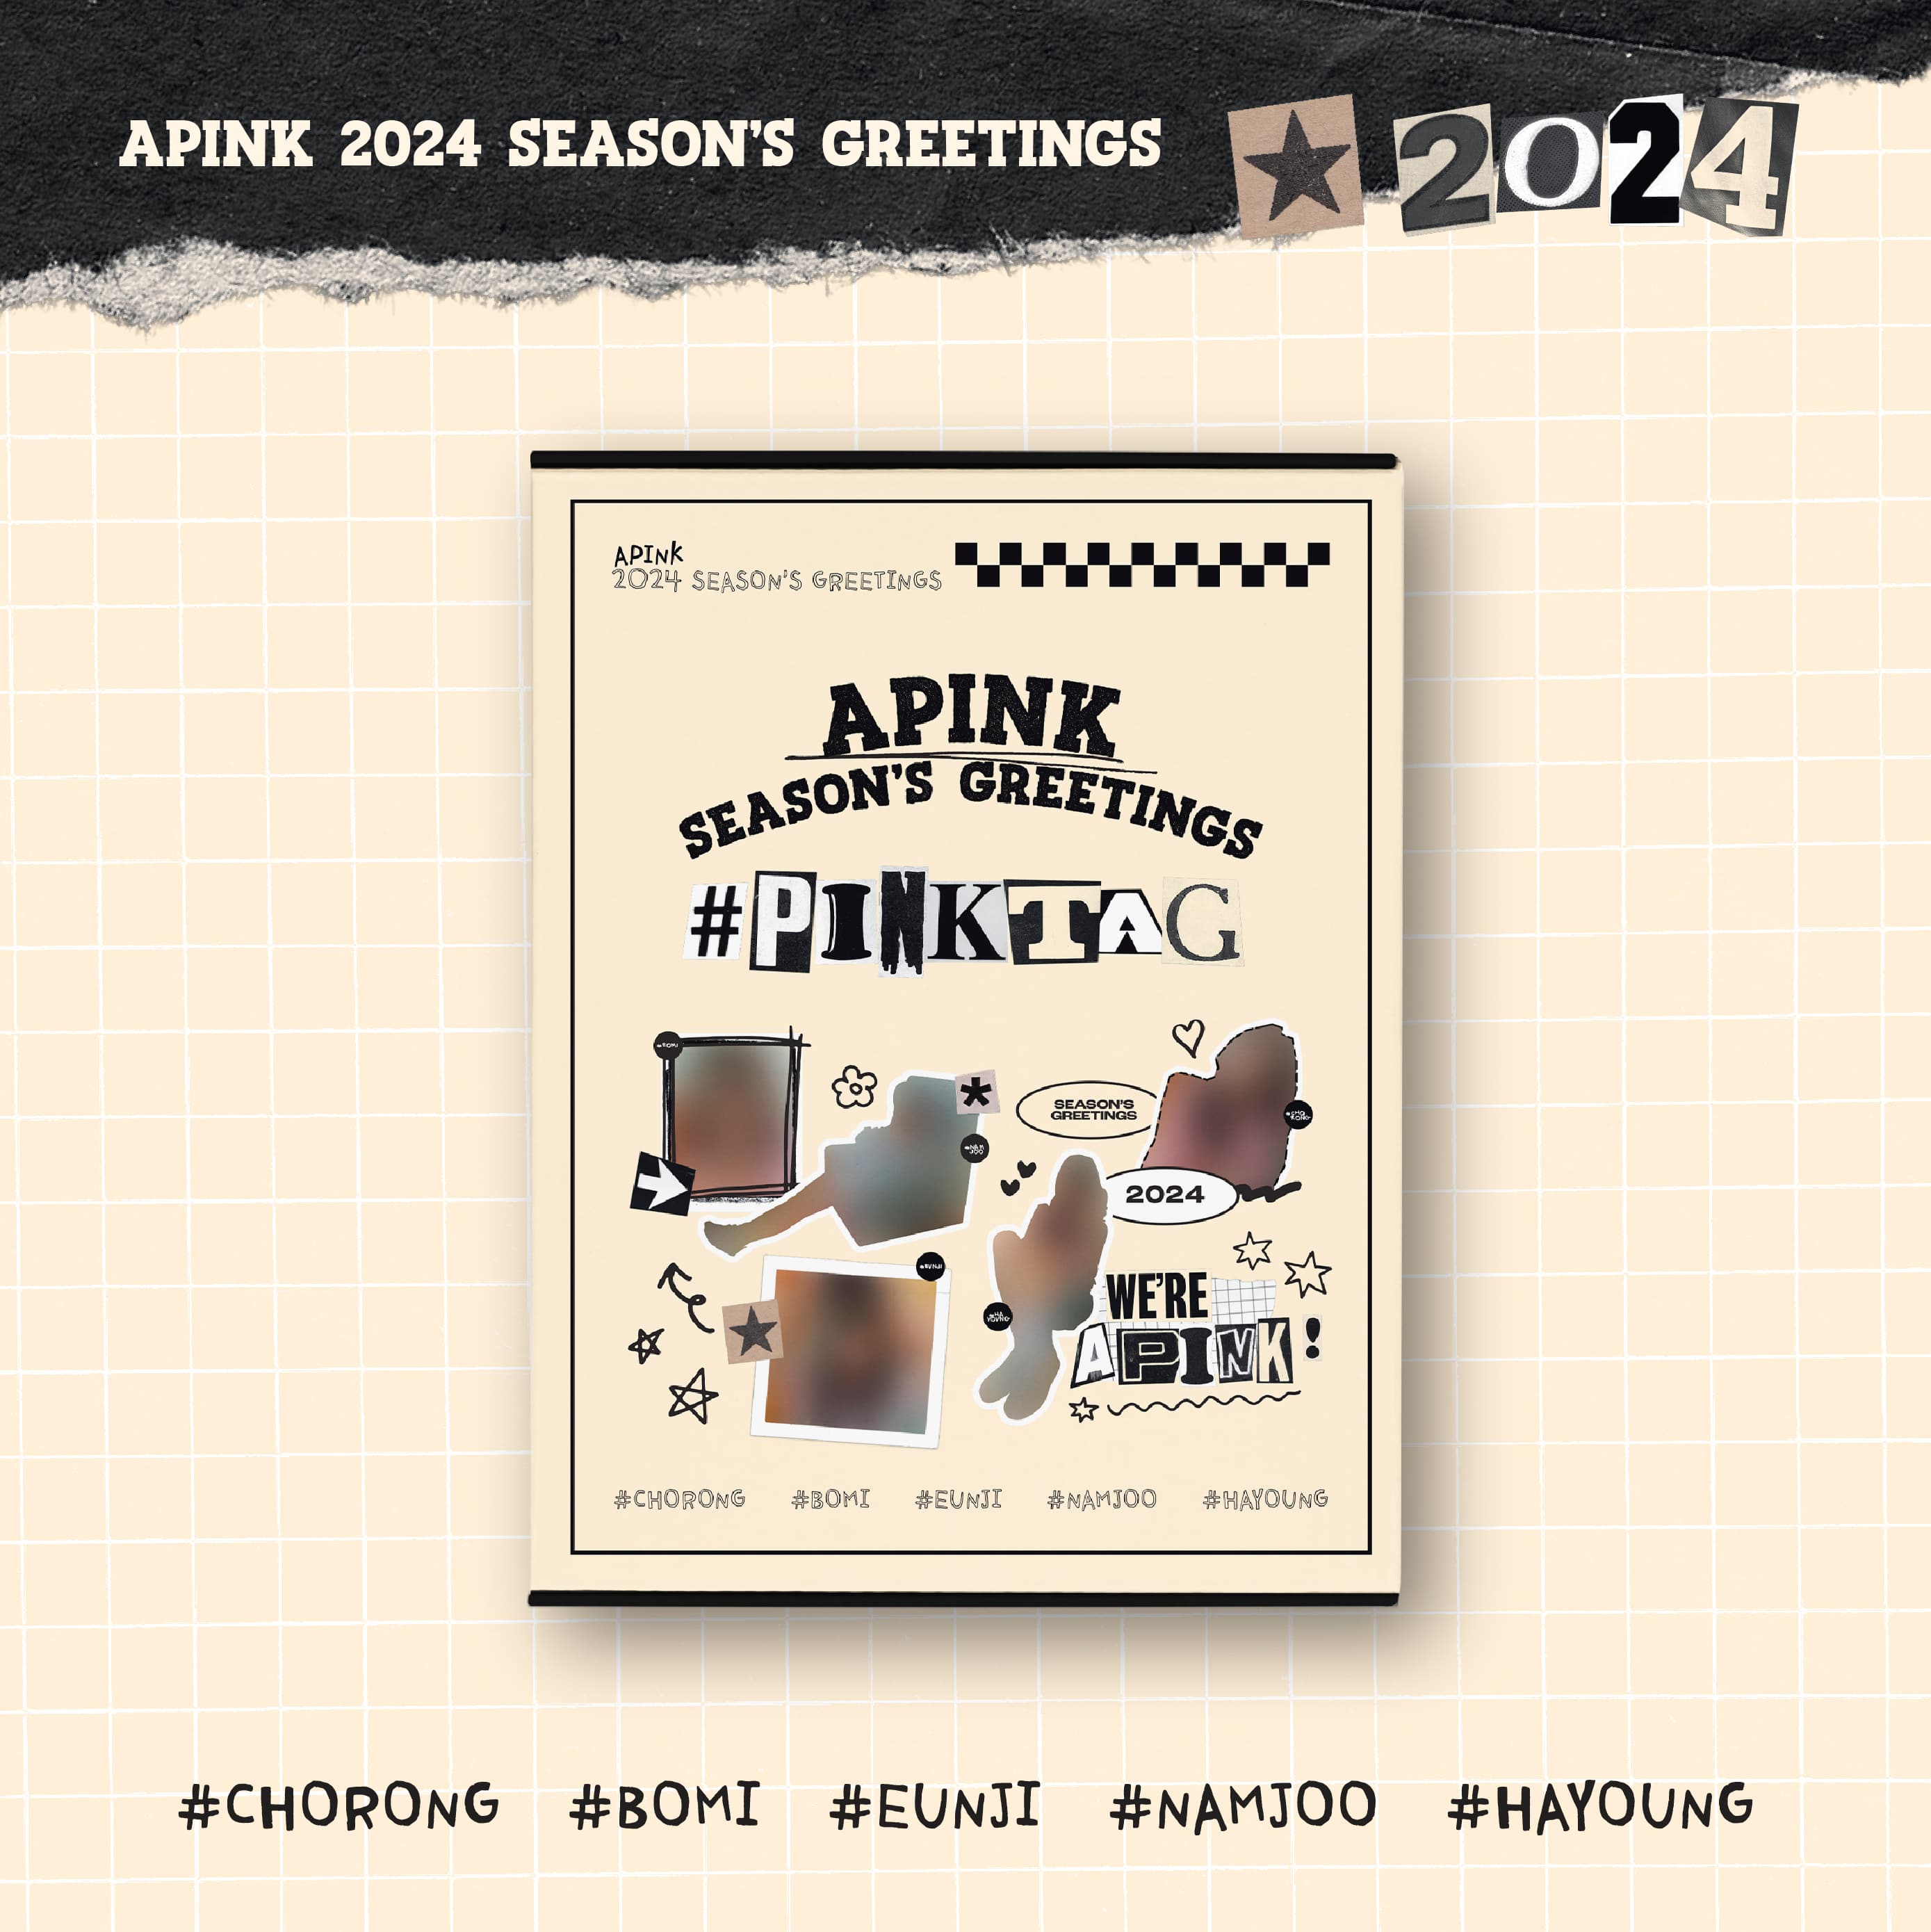 [PRE-ORDER] *fromm store GIFT* 에이핑크 Apink - 2024 SEASON'S GREETINGS #PINKTAG